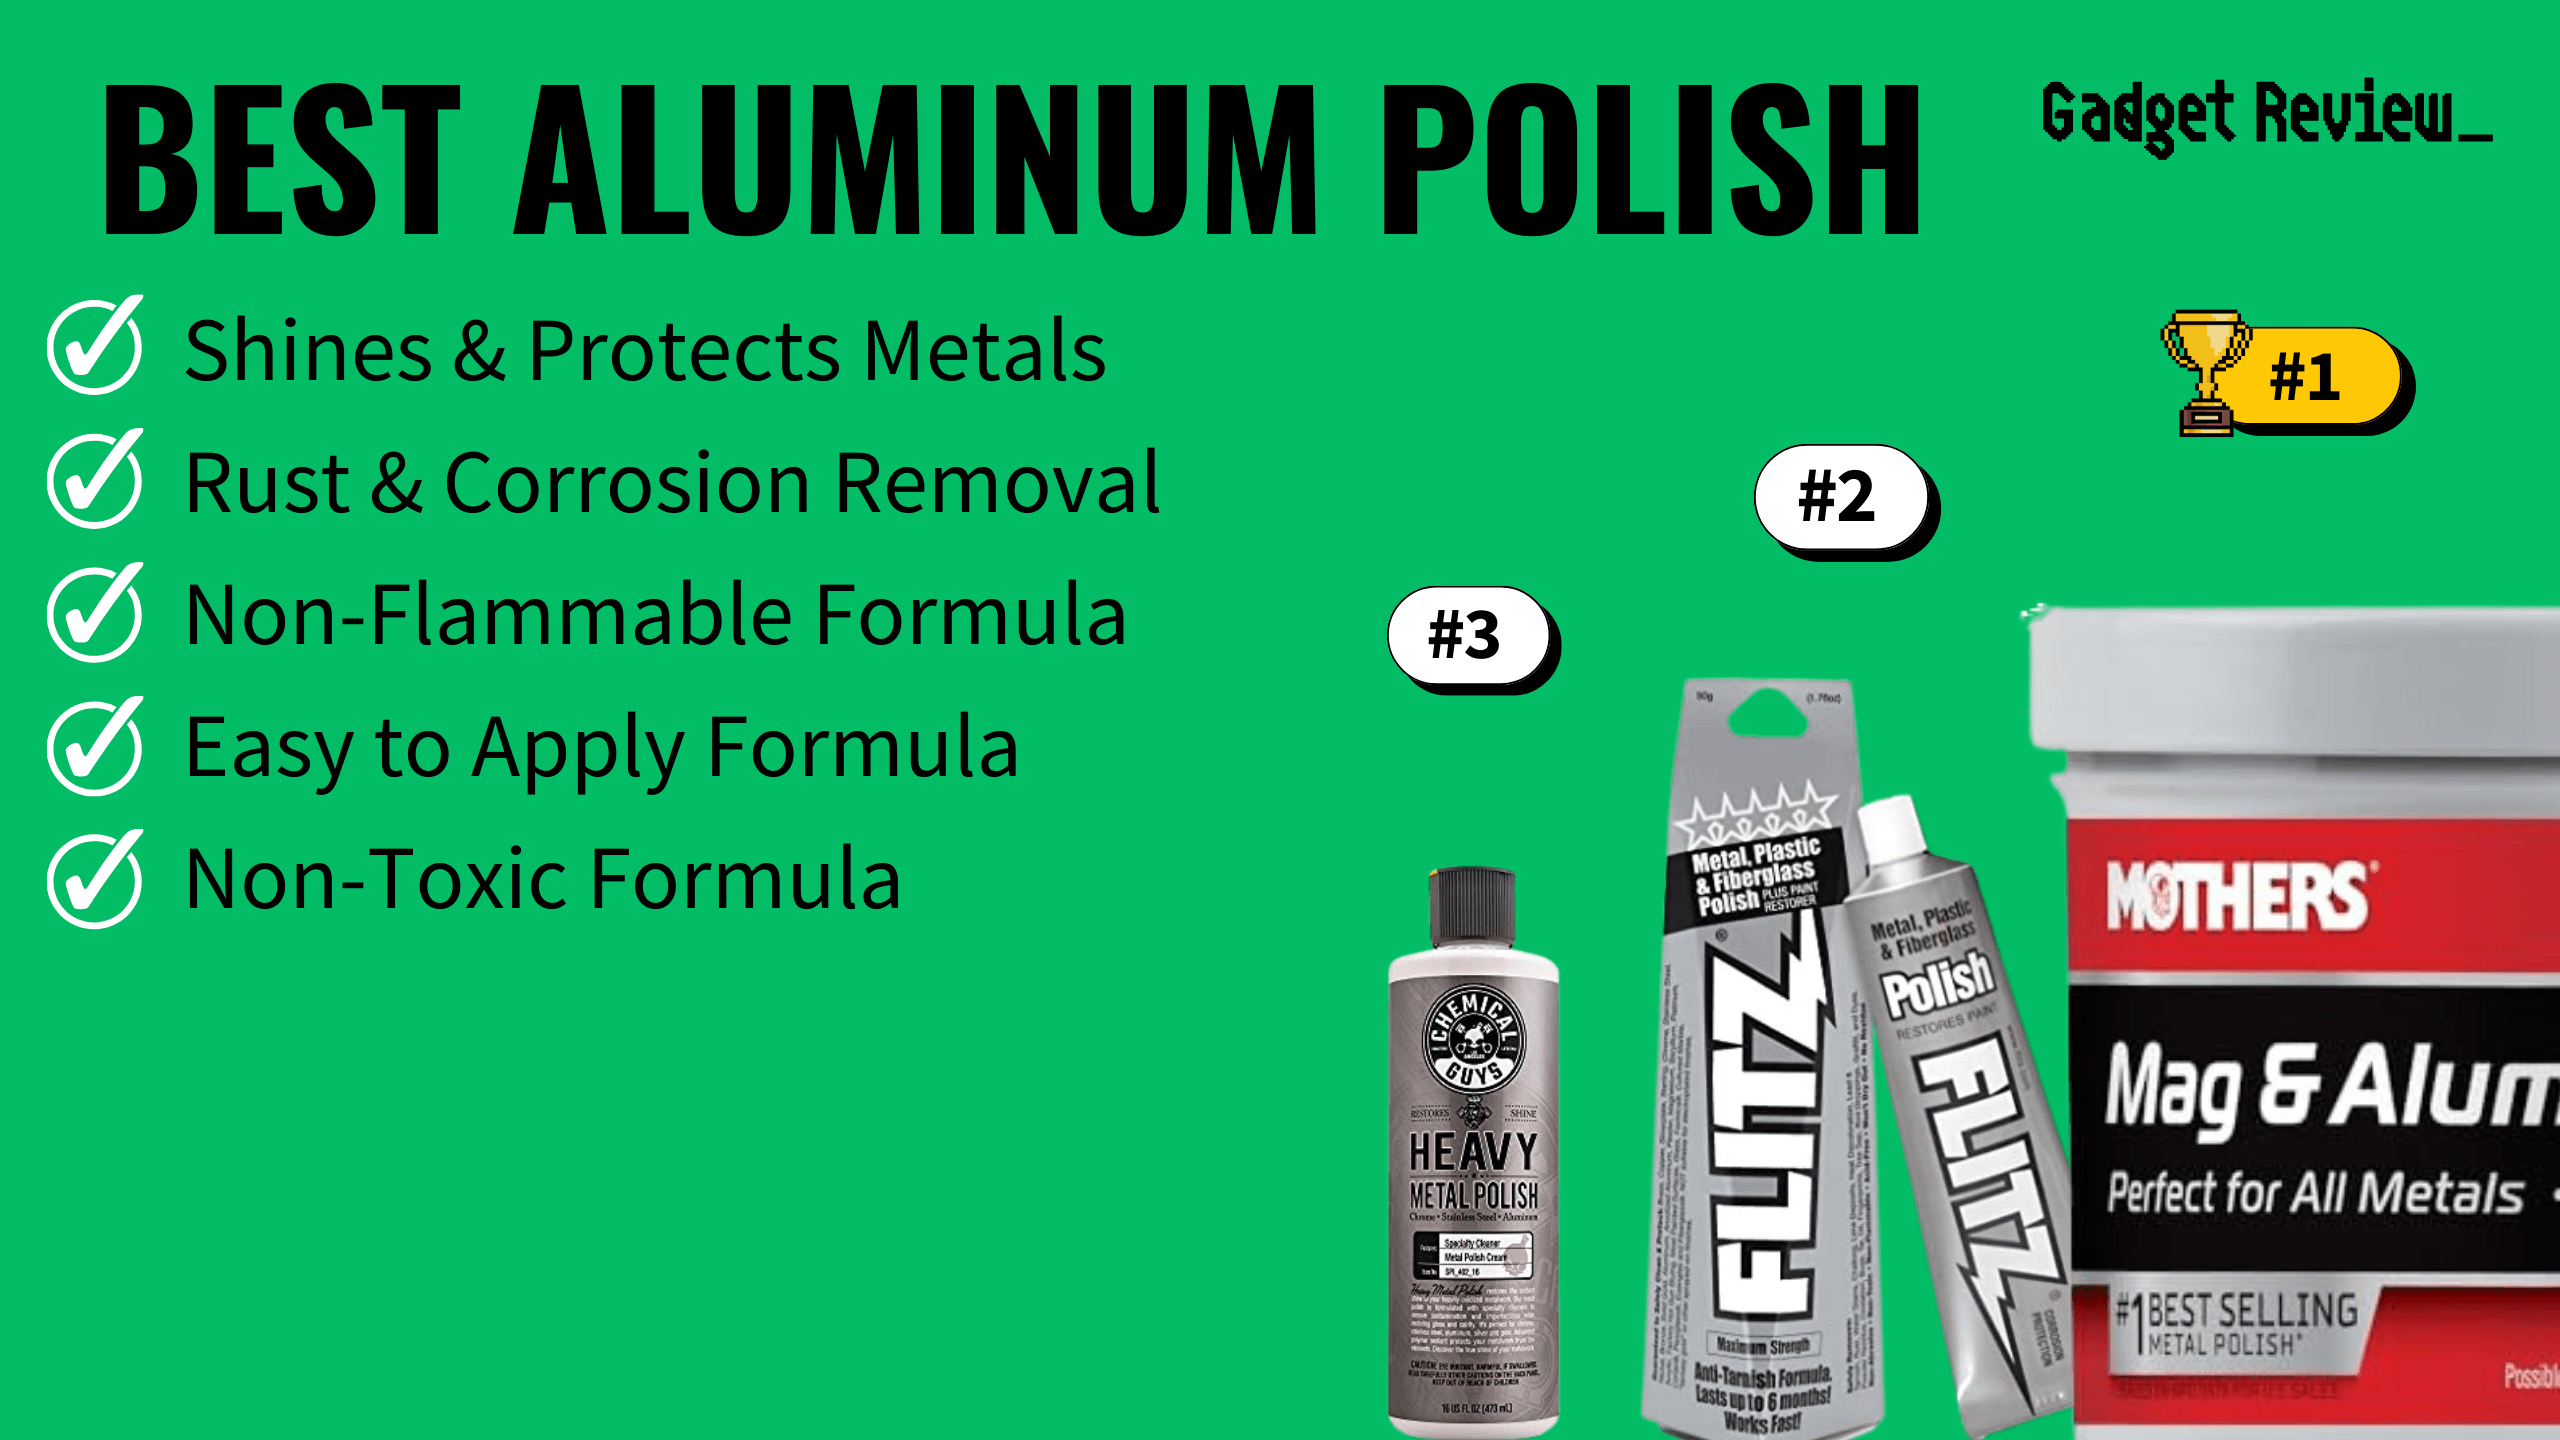 best aluminum polish featured image that shows the top three best tool models